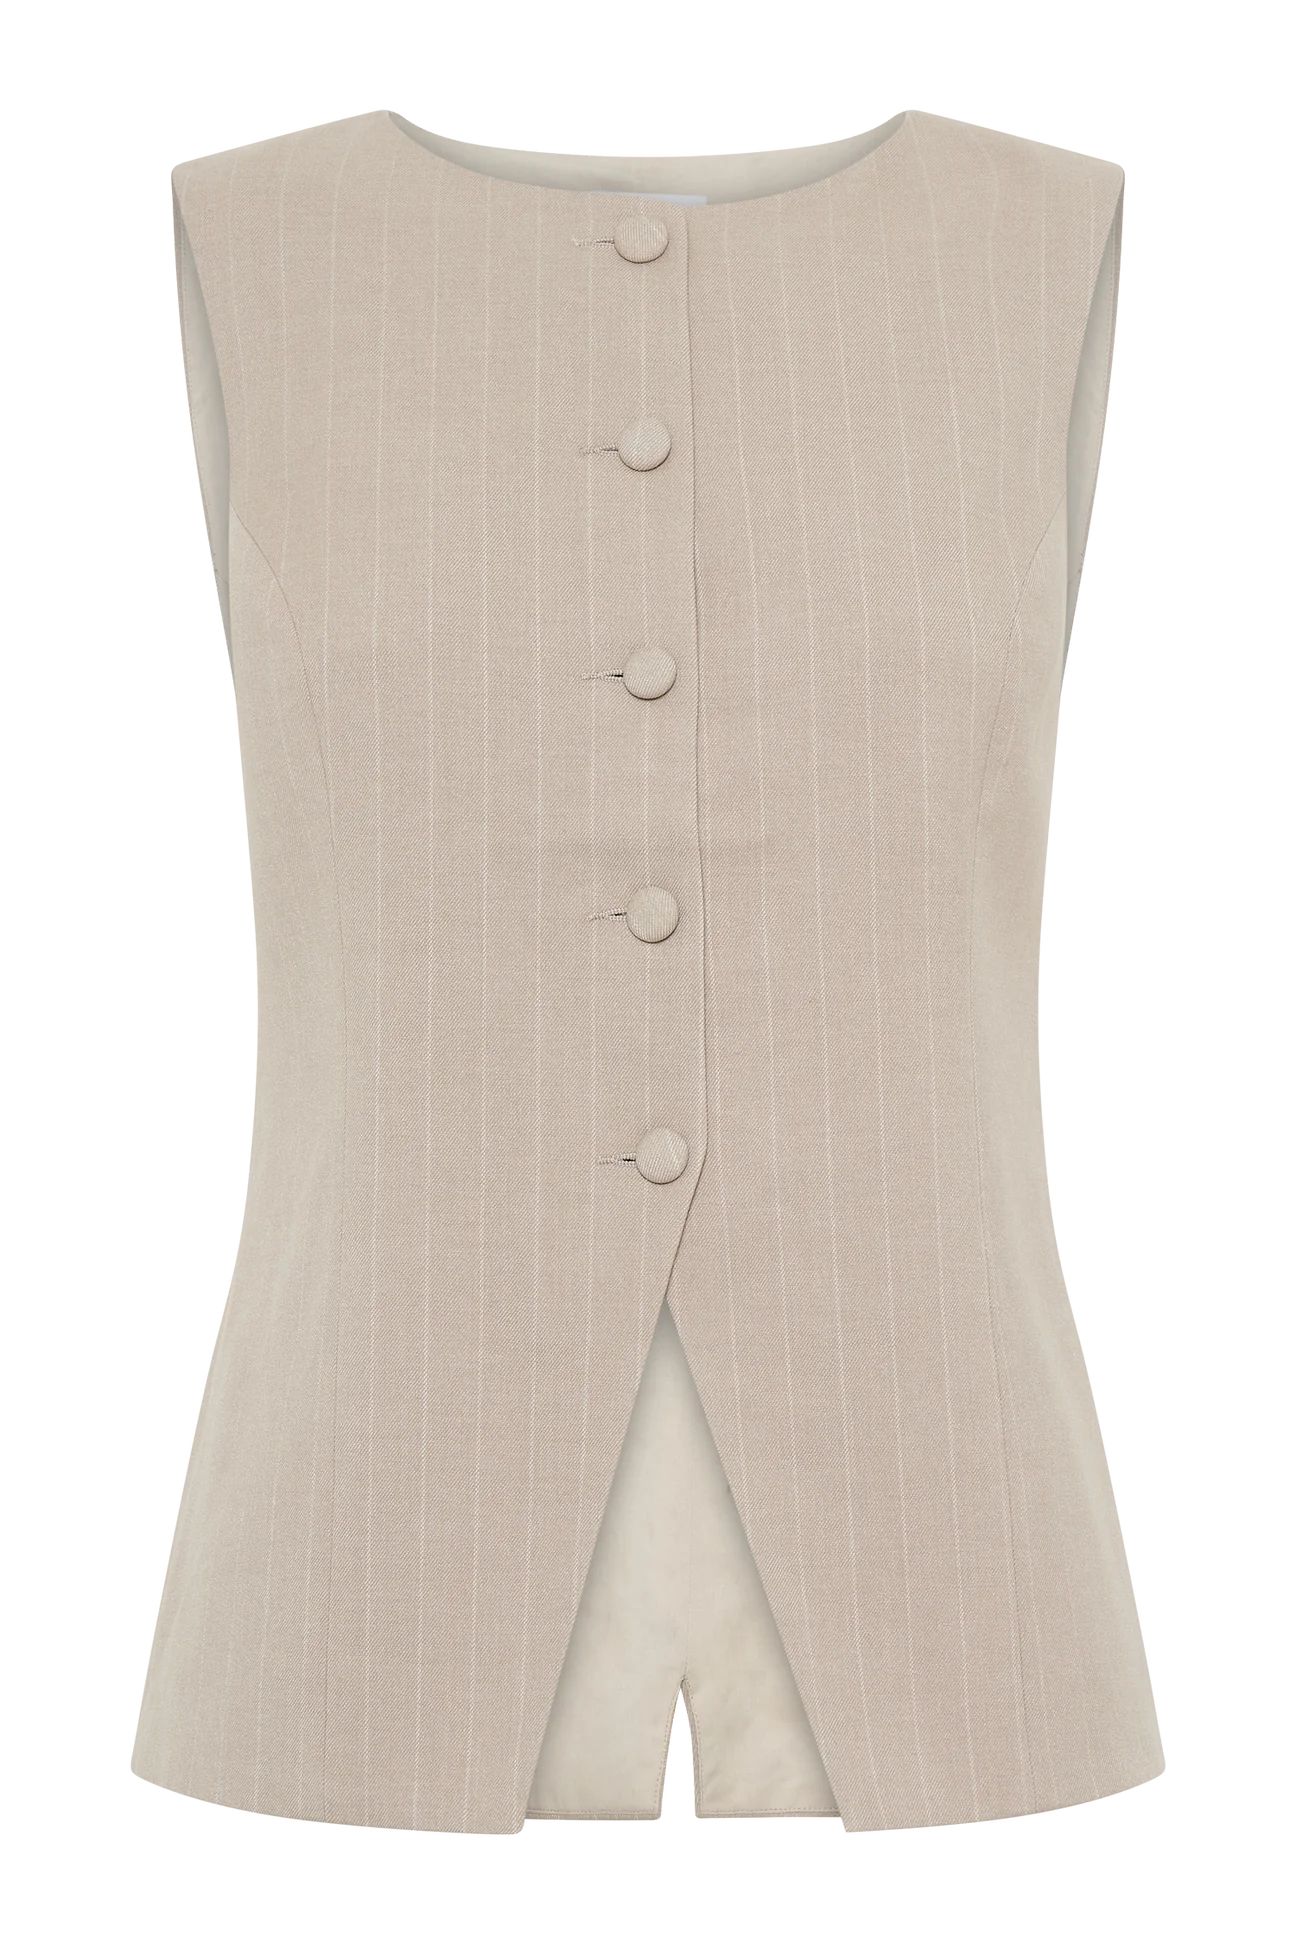 Tracey Suiting Vest - Taupe Pinstripe | MESHKI US